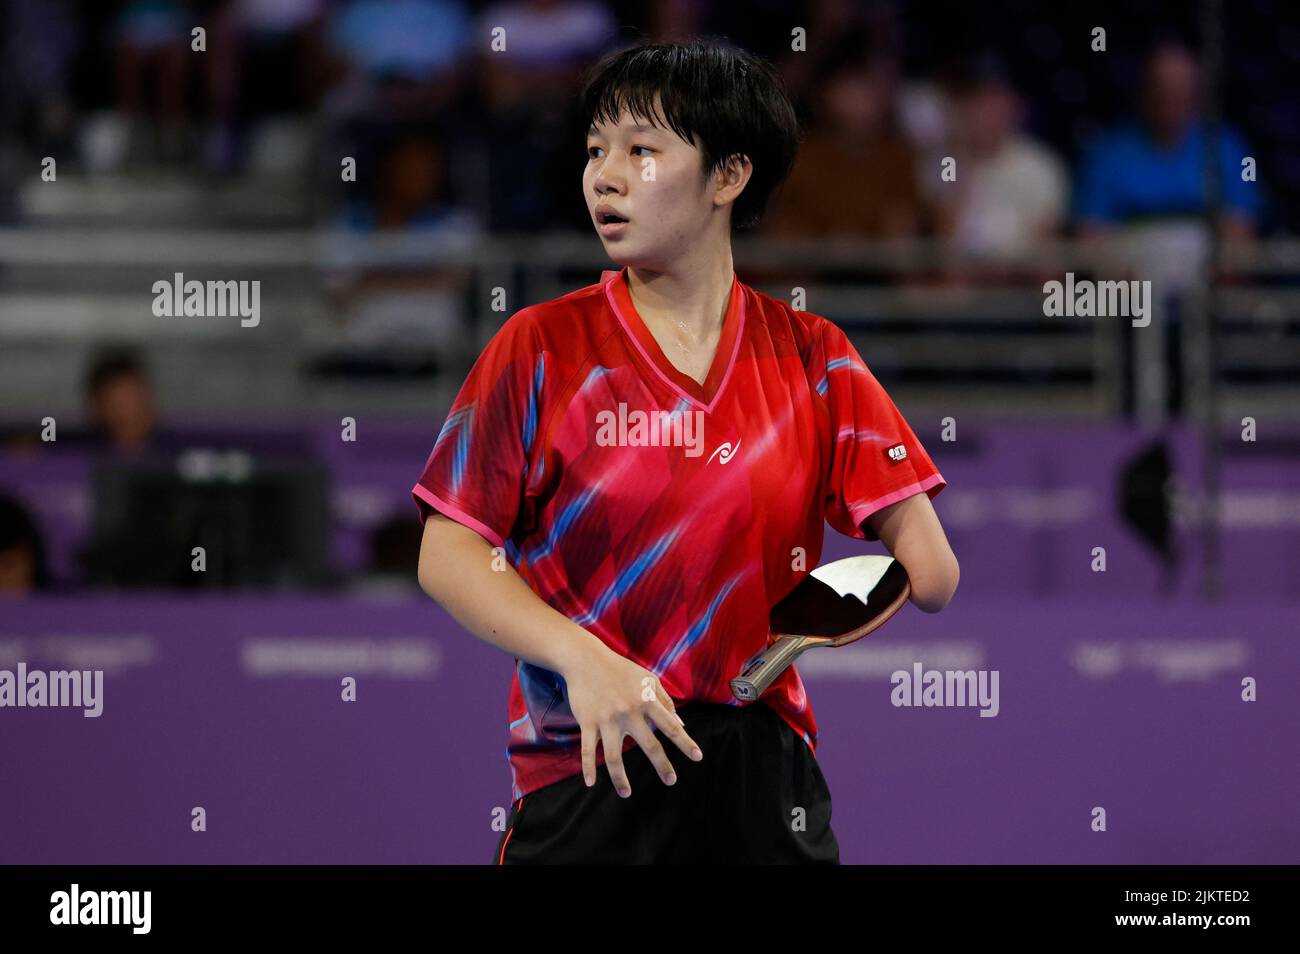 Commonwealth Games - Para Table Tennis - Women's Singles Classes 6-10 - Group 1 - The NEC Hall 3, Birmingham, Britain - August 3, 2022 Malaysia's Gloria Gracia Wong Sze reacts during her match against India's Baby Sahana Ravi REUTERS/Jason Cairnduff Stock Photo